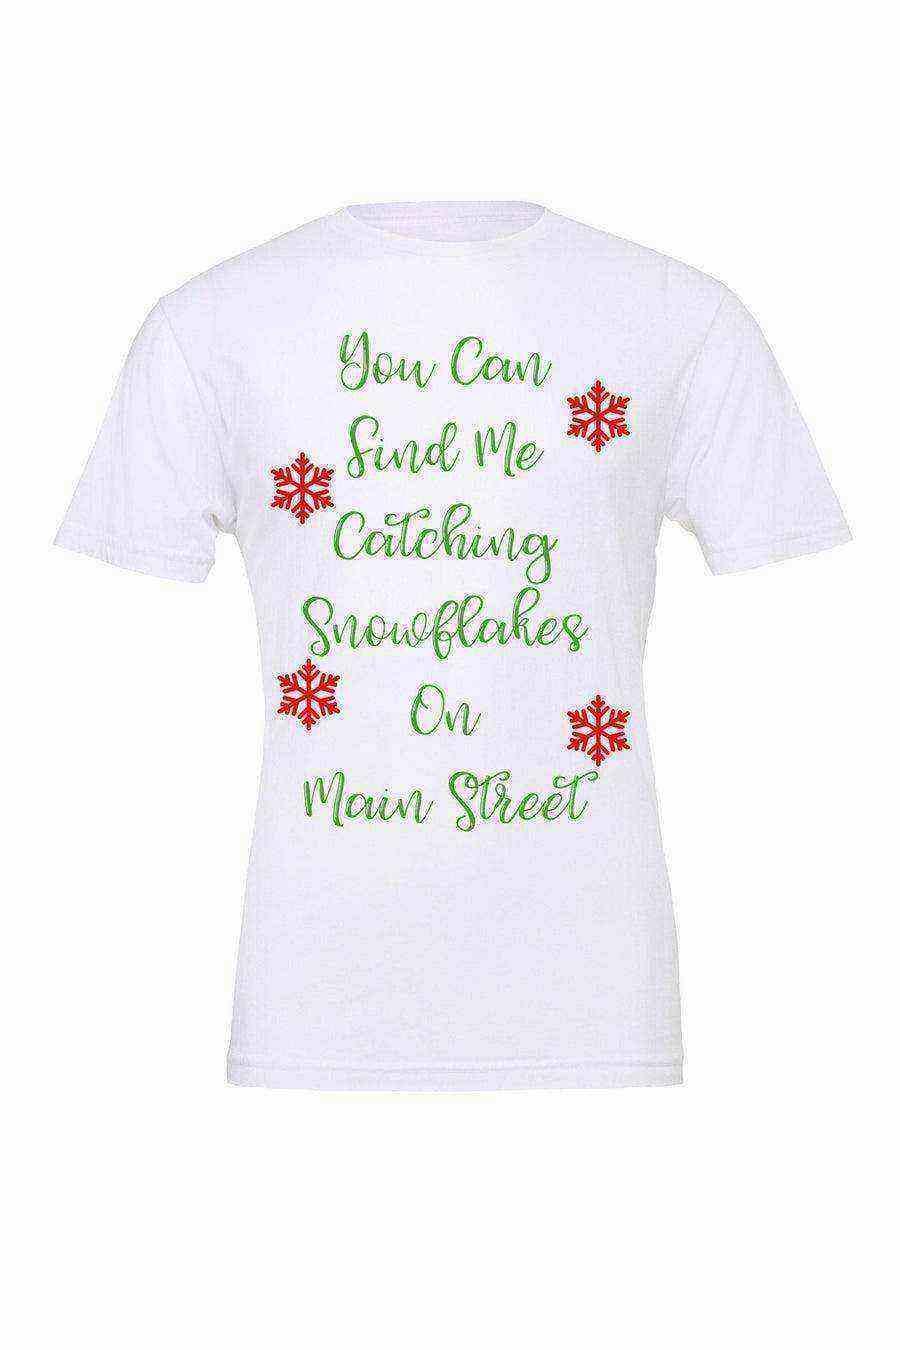 Womens | You Can Find Me Catching Snowfalkes on Main Street - Dylan's Tees